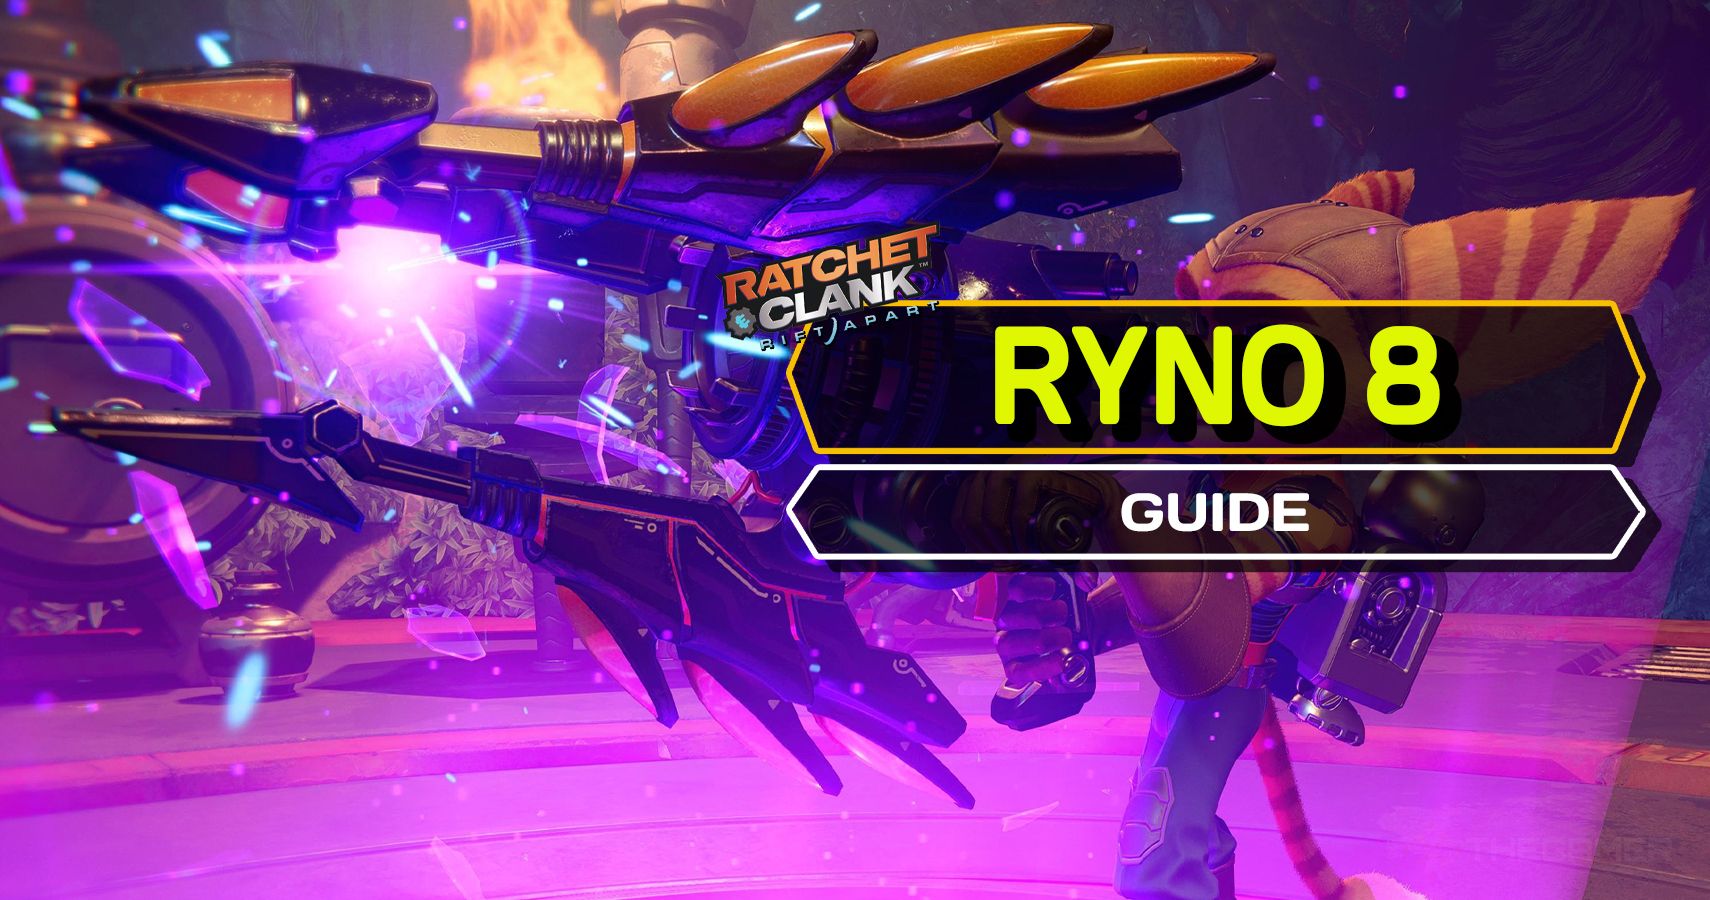 Ratchet and Clank Rift Apart Ryno 8 Guide